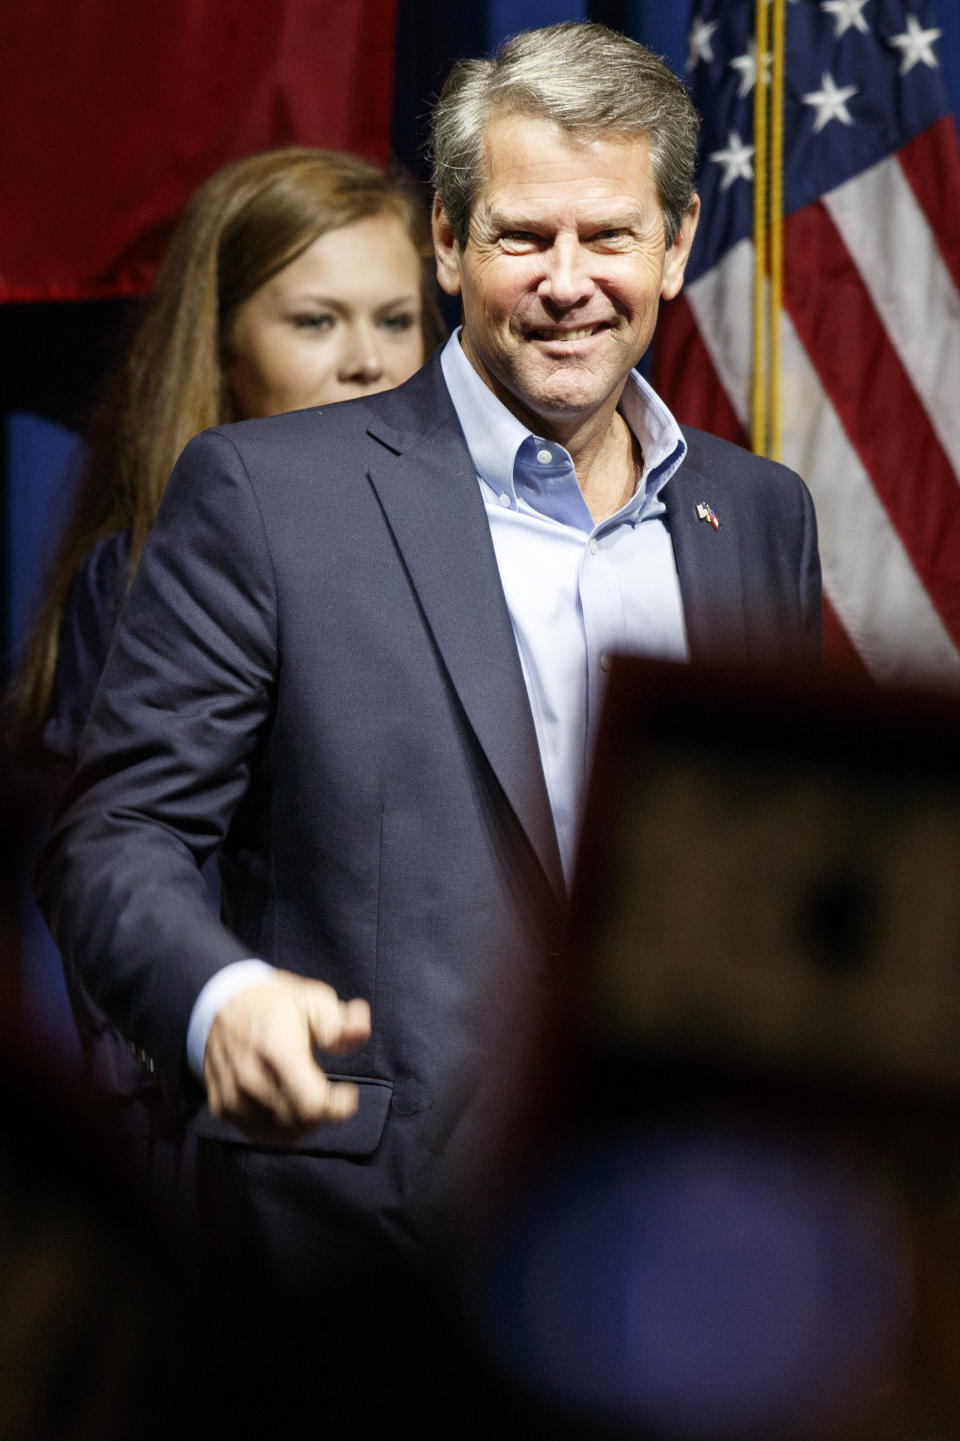 Staff photo by C.B. Schmelter / Republican gubernatorial candidate Brian Kemp takes the stage during a "Get Out The Vote" rally at the Dalton Convention Center on Thursday, Nov. 1, 2018 in Dalton, Ga. Republican Brian Kemp is facing off against Democrat Stacey Abrams for governor in Georgia.(C.B. Schmelter/Chattanooga Times Free Press via AP)